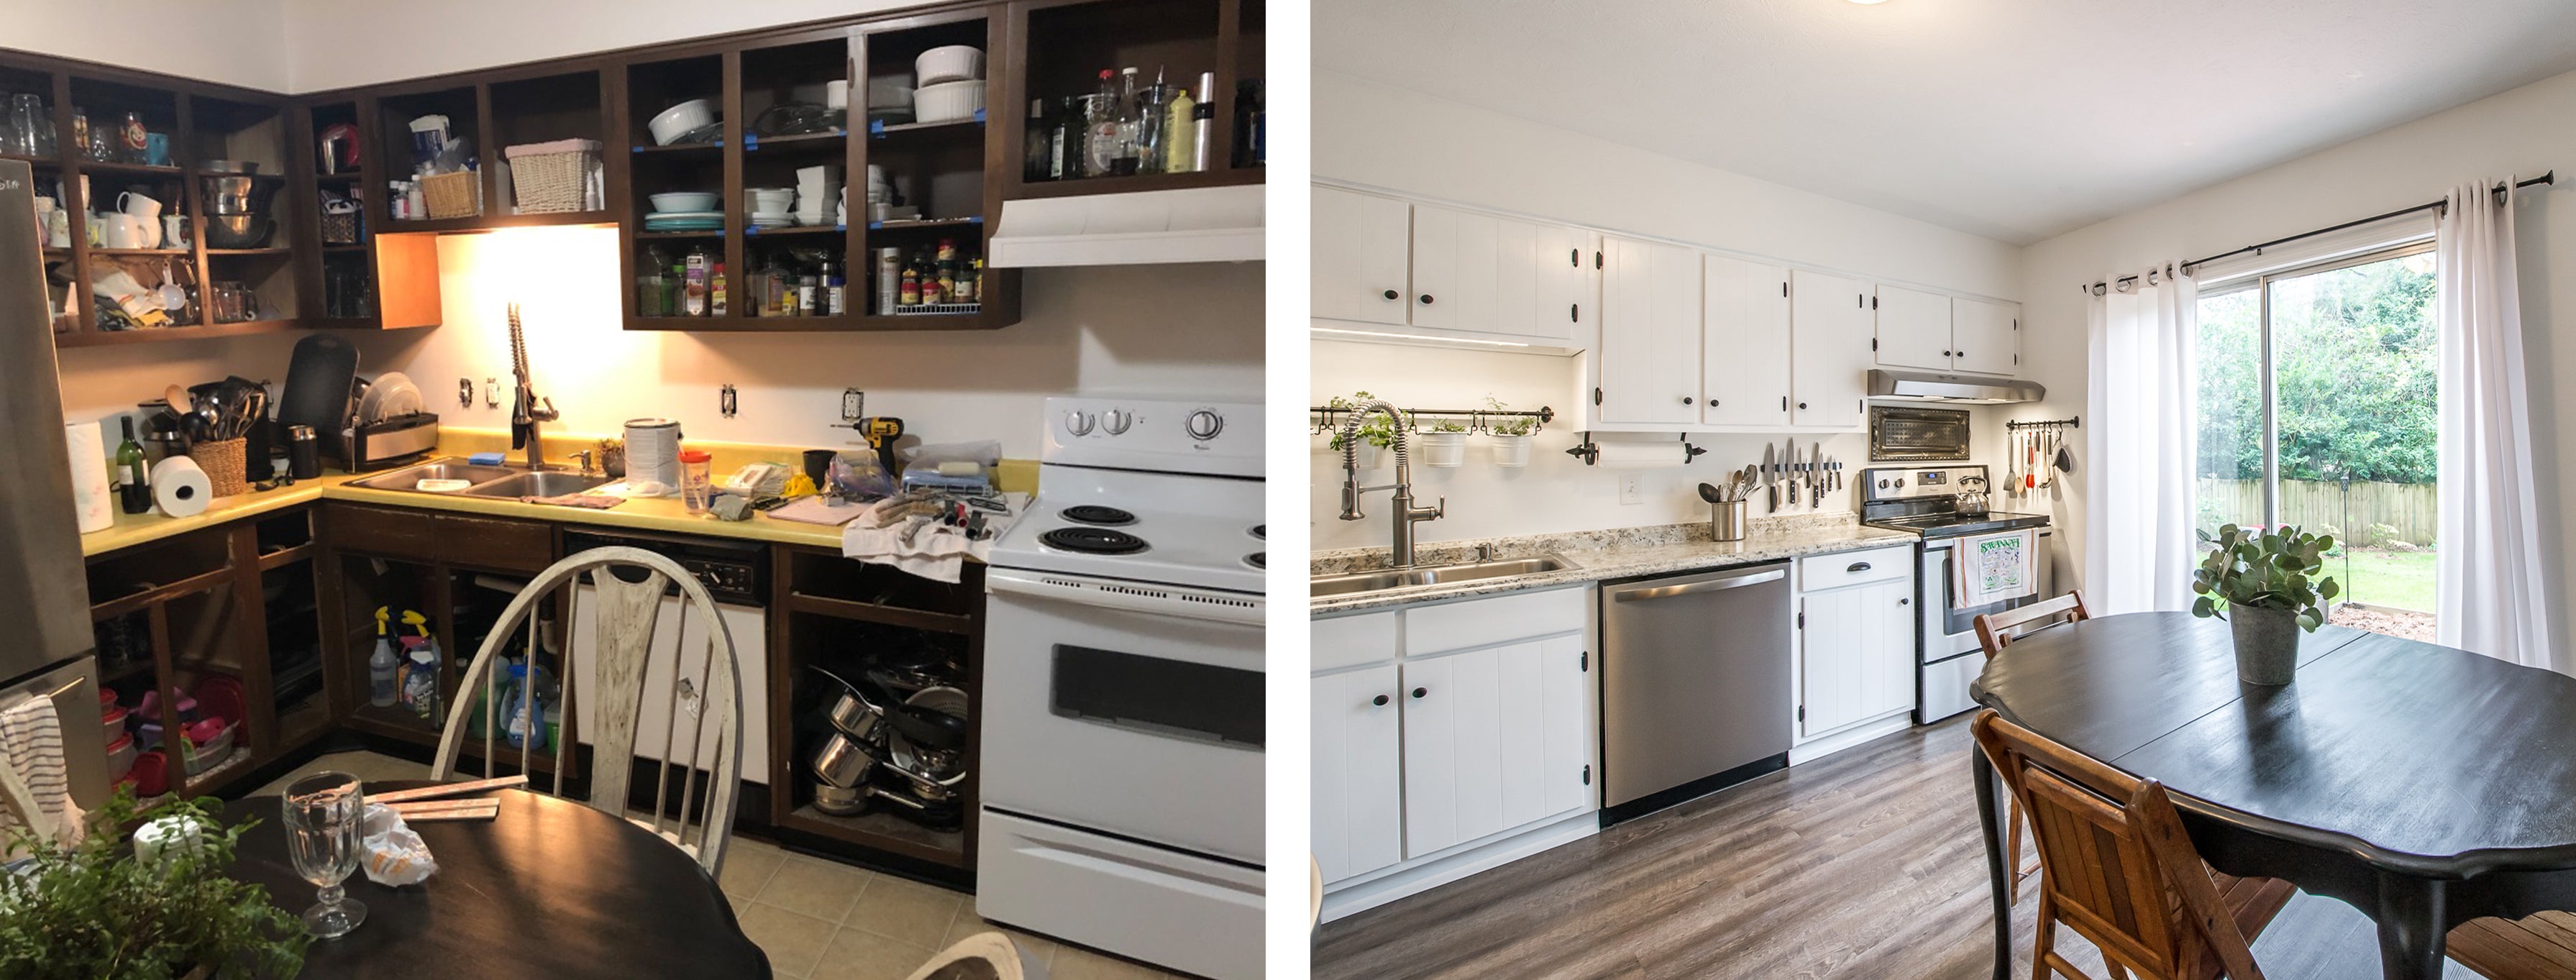 Before and After Kitchen - Melissa Colson